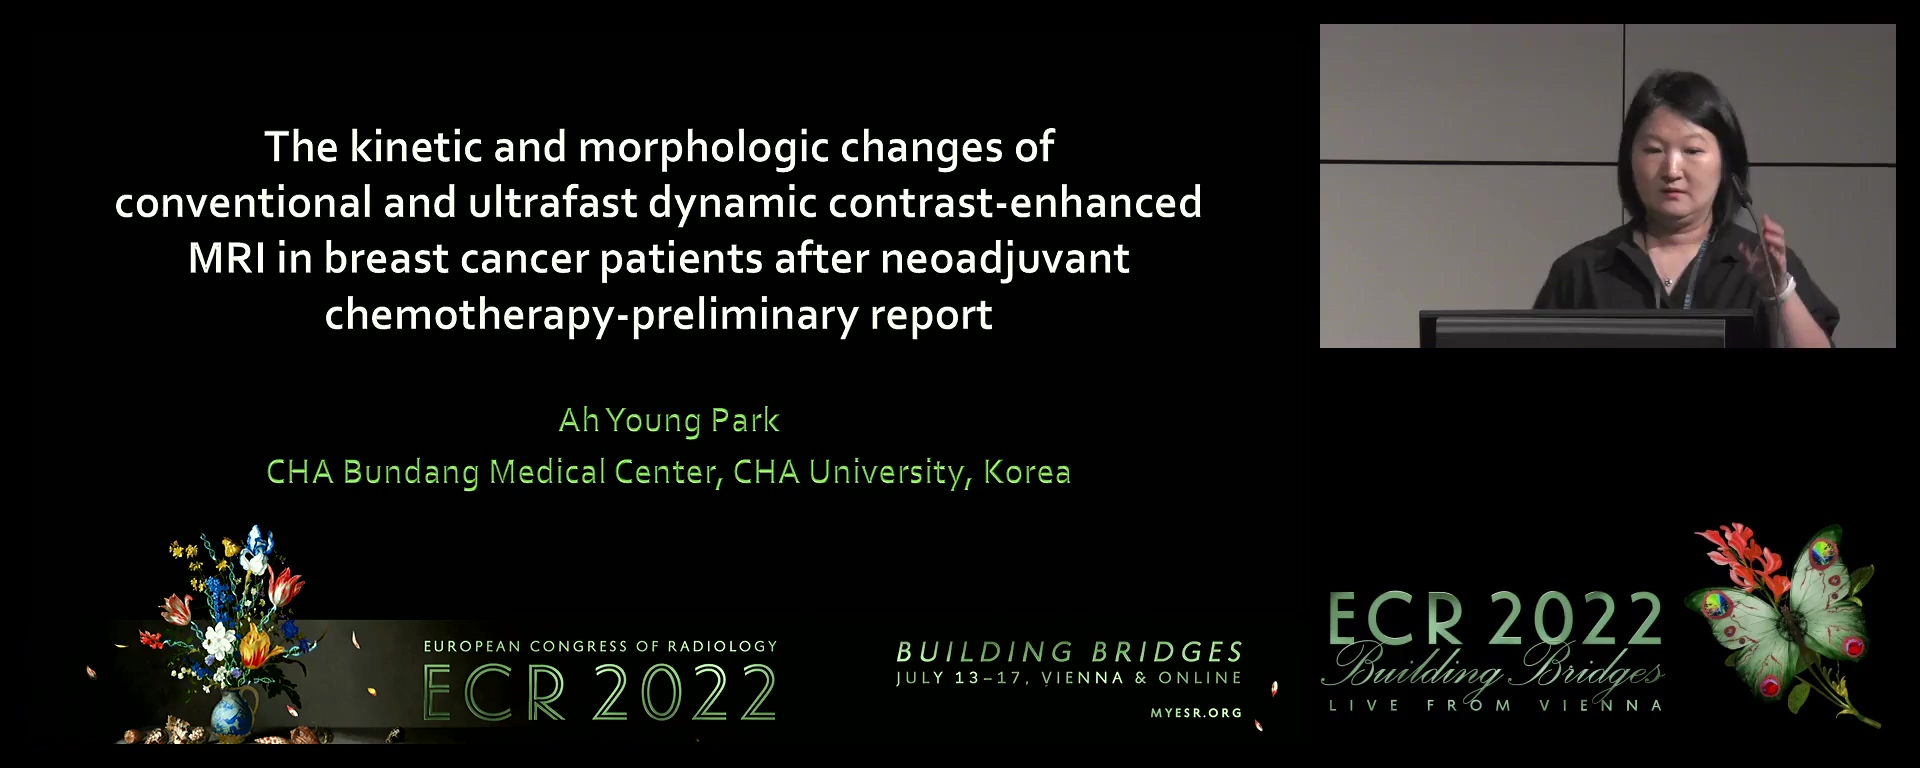 The kinetic and morphologic changes of conventional and ultrafast dynamic contrast-enhanced MRI in breast cancer patients after neoadjuvant chemotherapy-preliminary report - Ah Young Park, Seongnam-si / KR